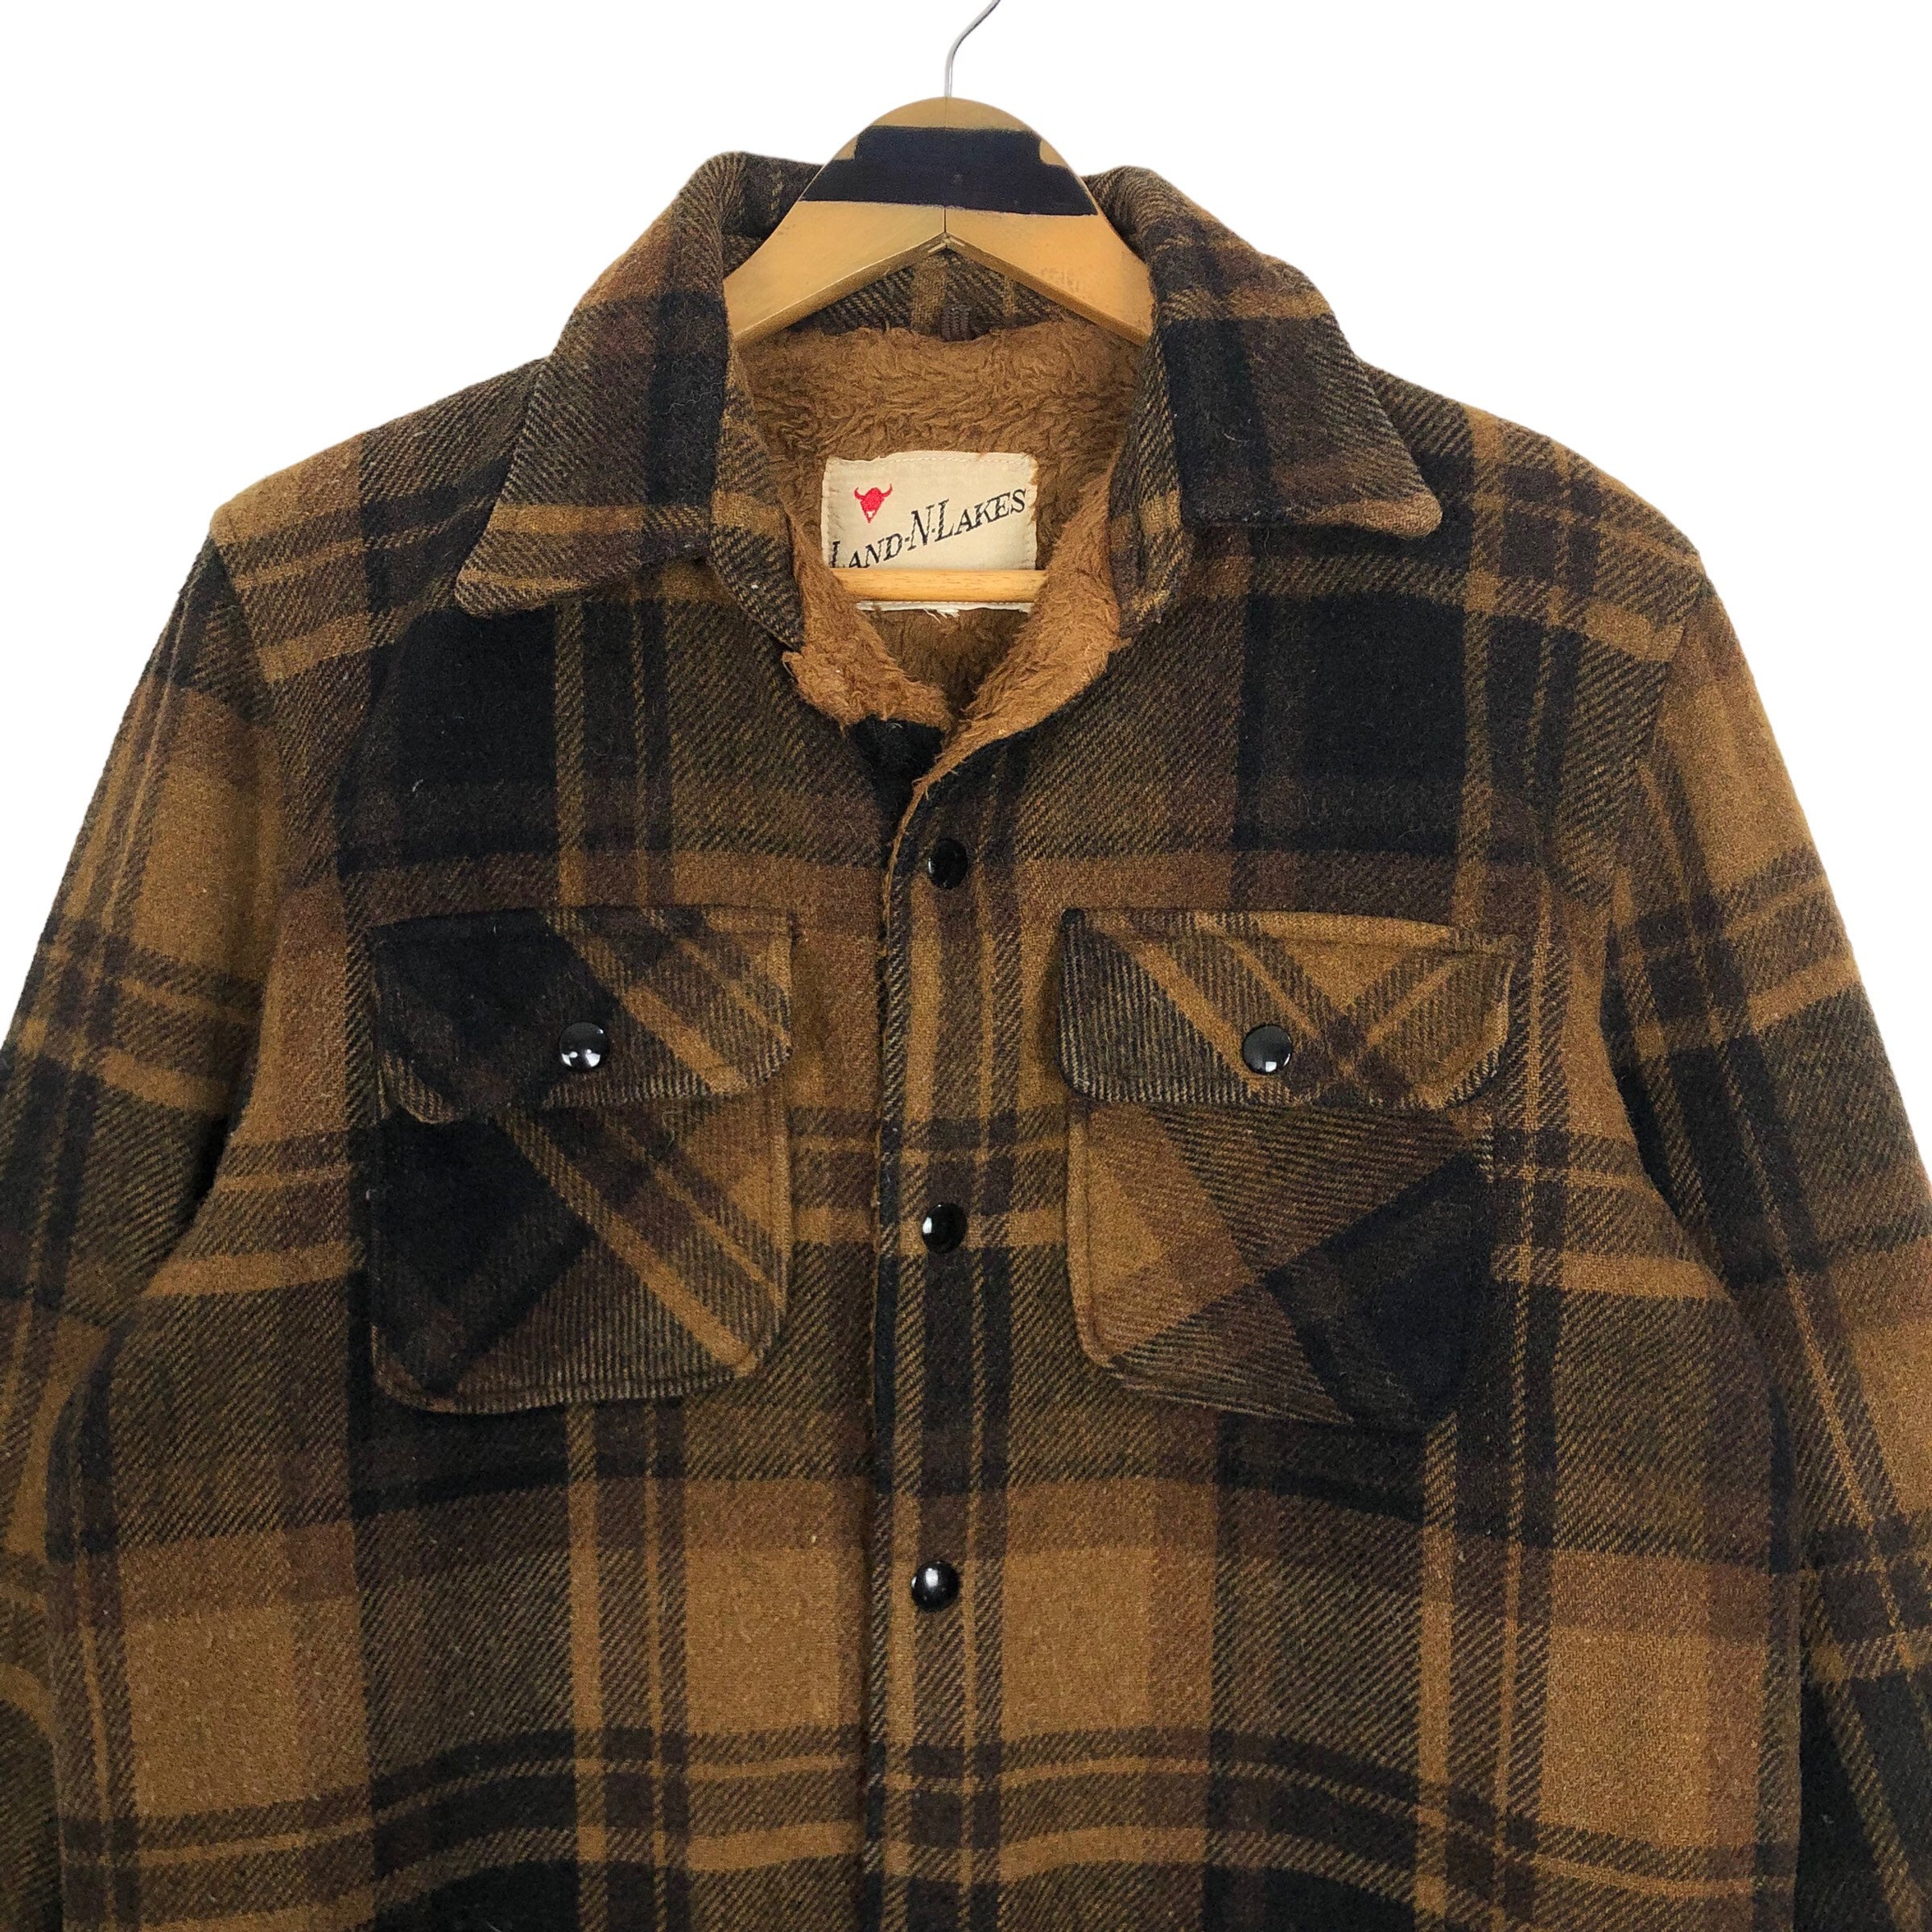 Vintage 90s Land-n-lakes Wool Flannel Shearling Jacket Button up 